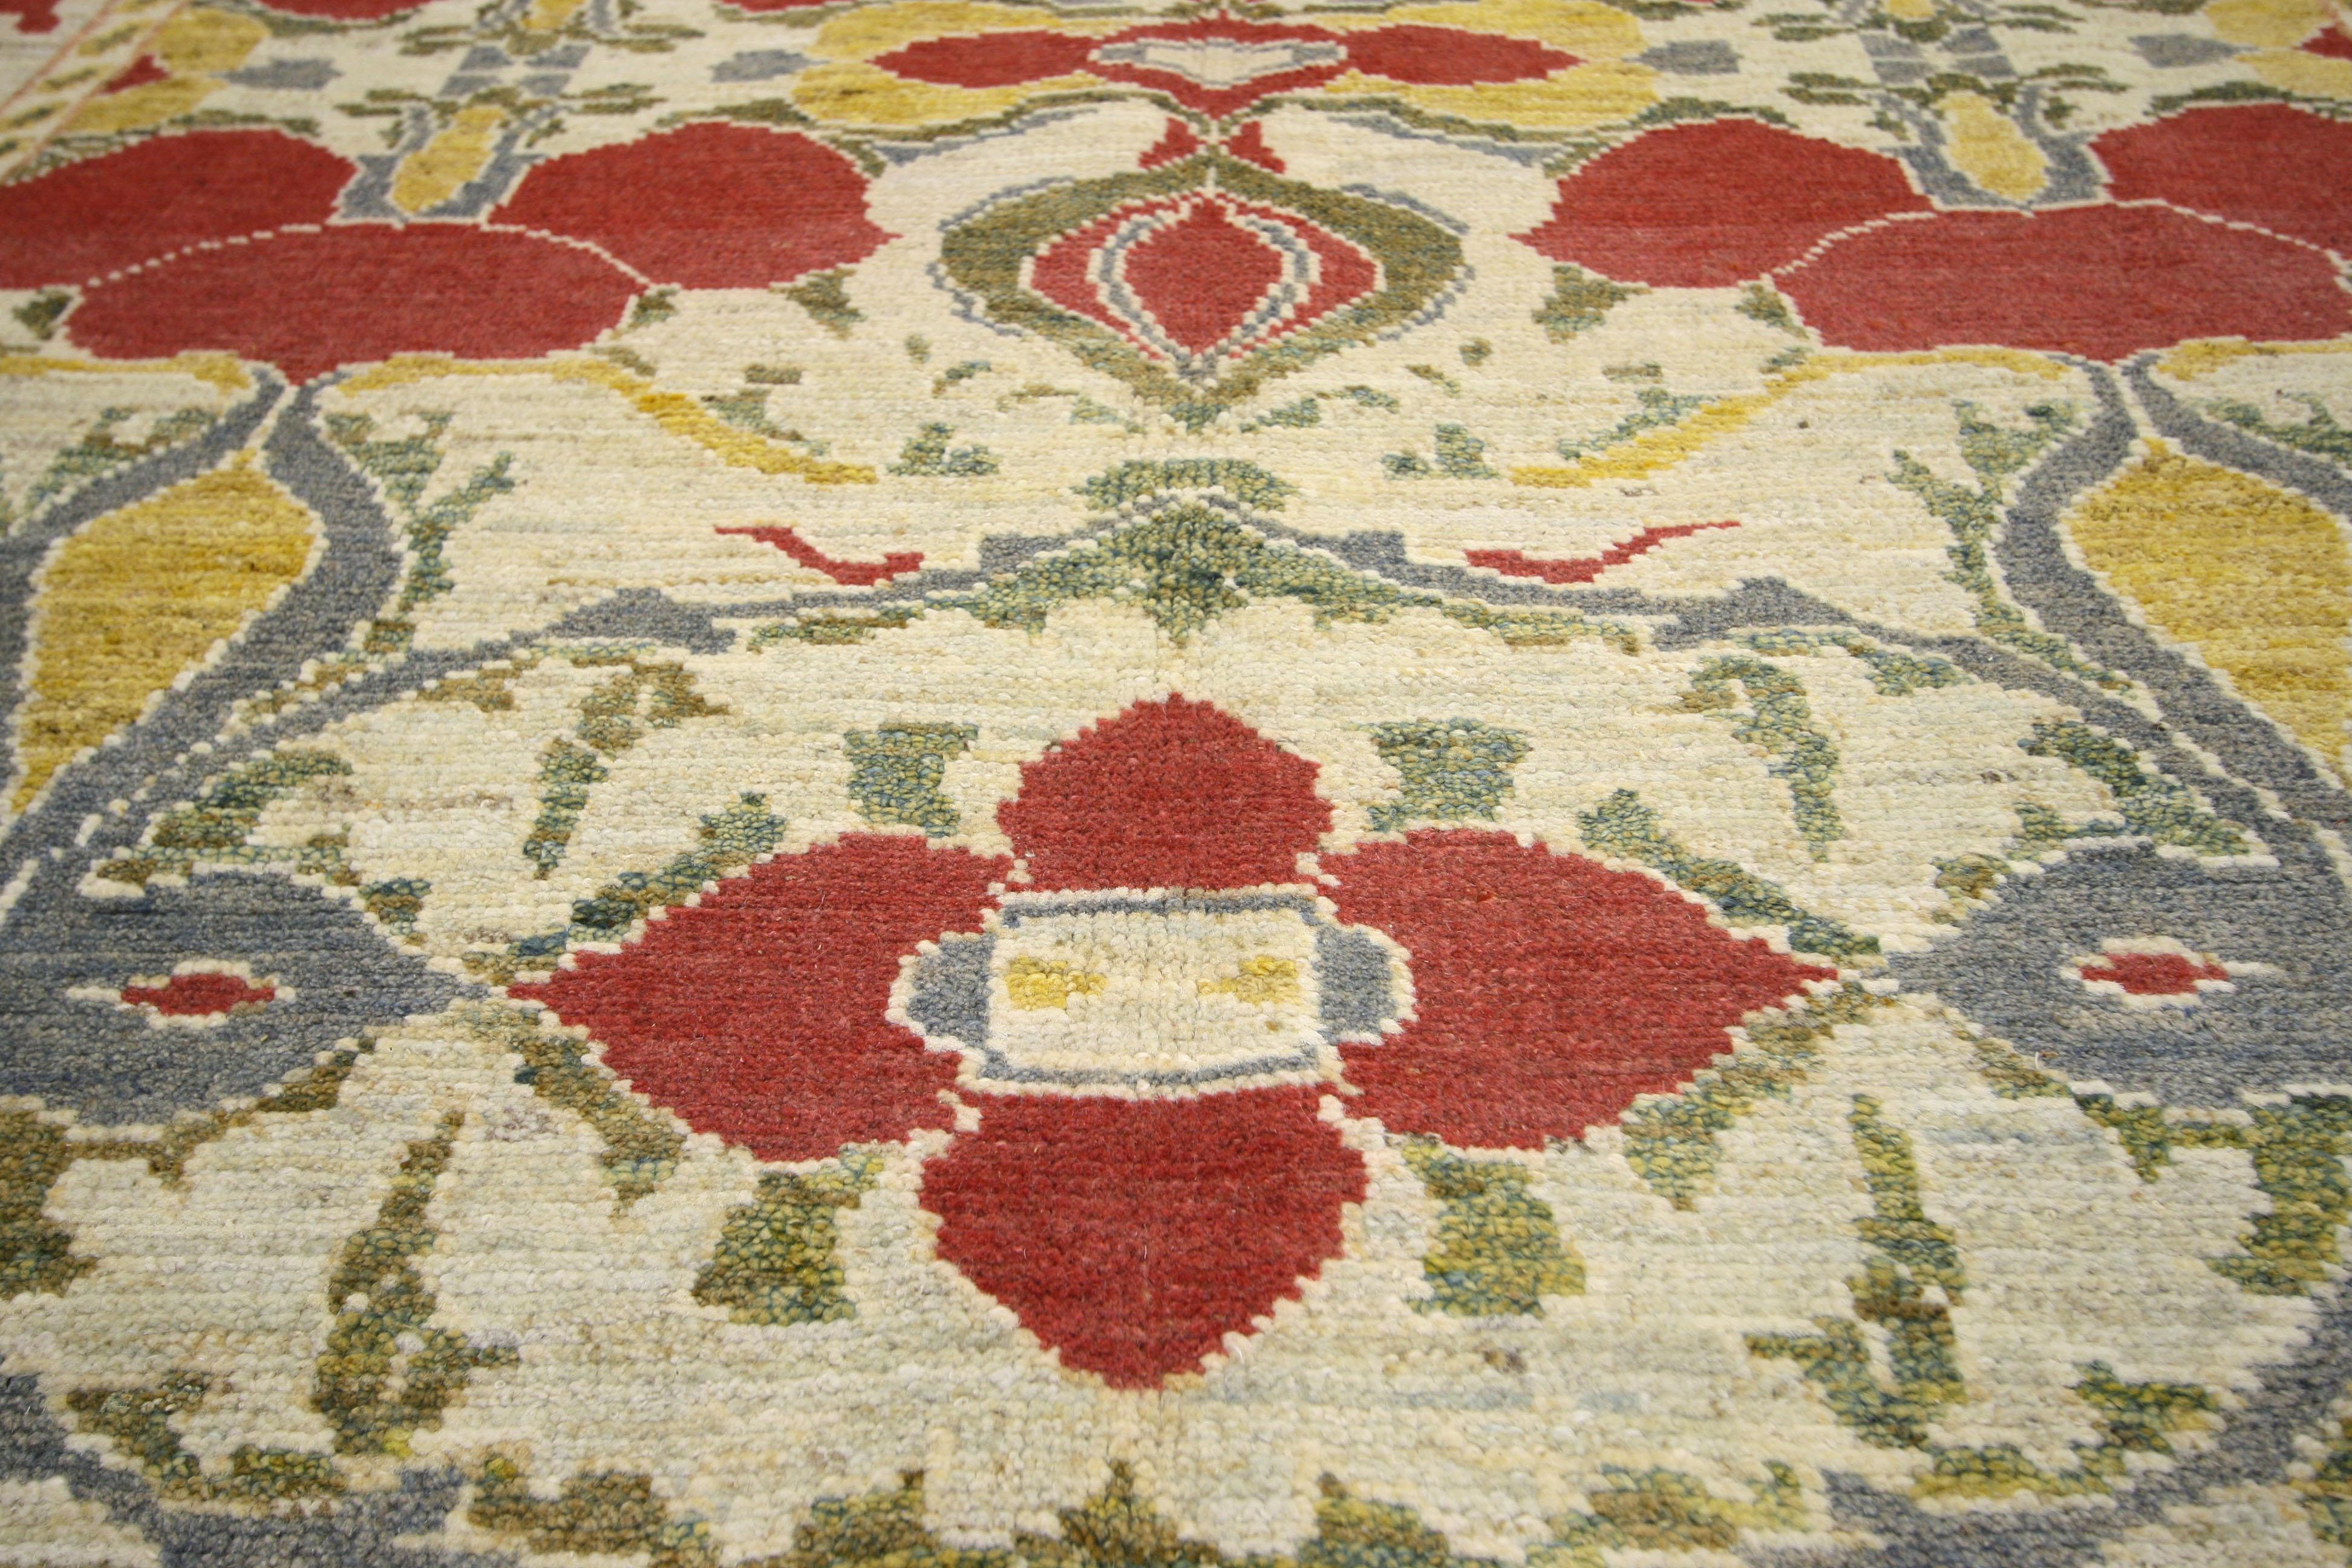 60758 New Turkish Oushak Rug with Arts & Crafts Style Inspired by William Morris 06'04 x 09'08. The architectural elements of naturalistic forms combined with Arts and Crafts style, this new Turkish Oushak rug draws inspiration from William Morris.